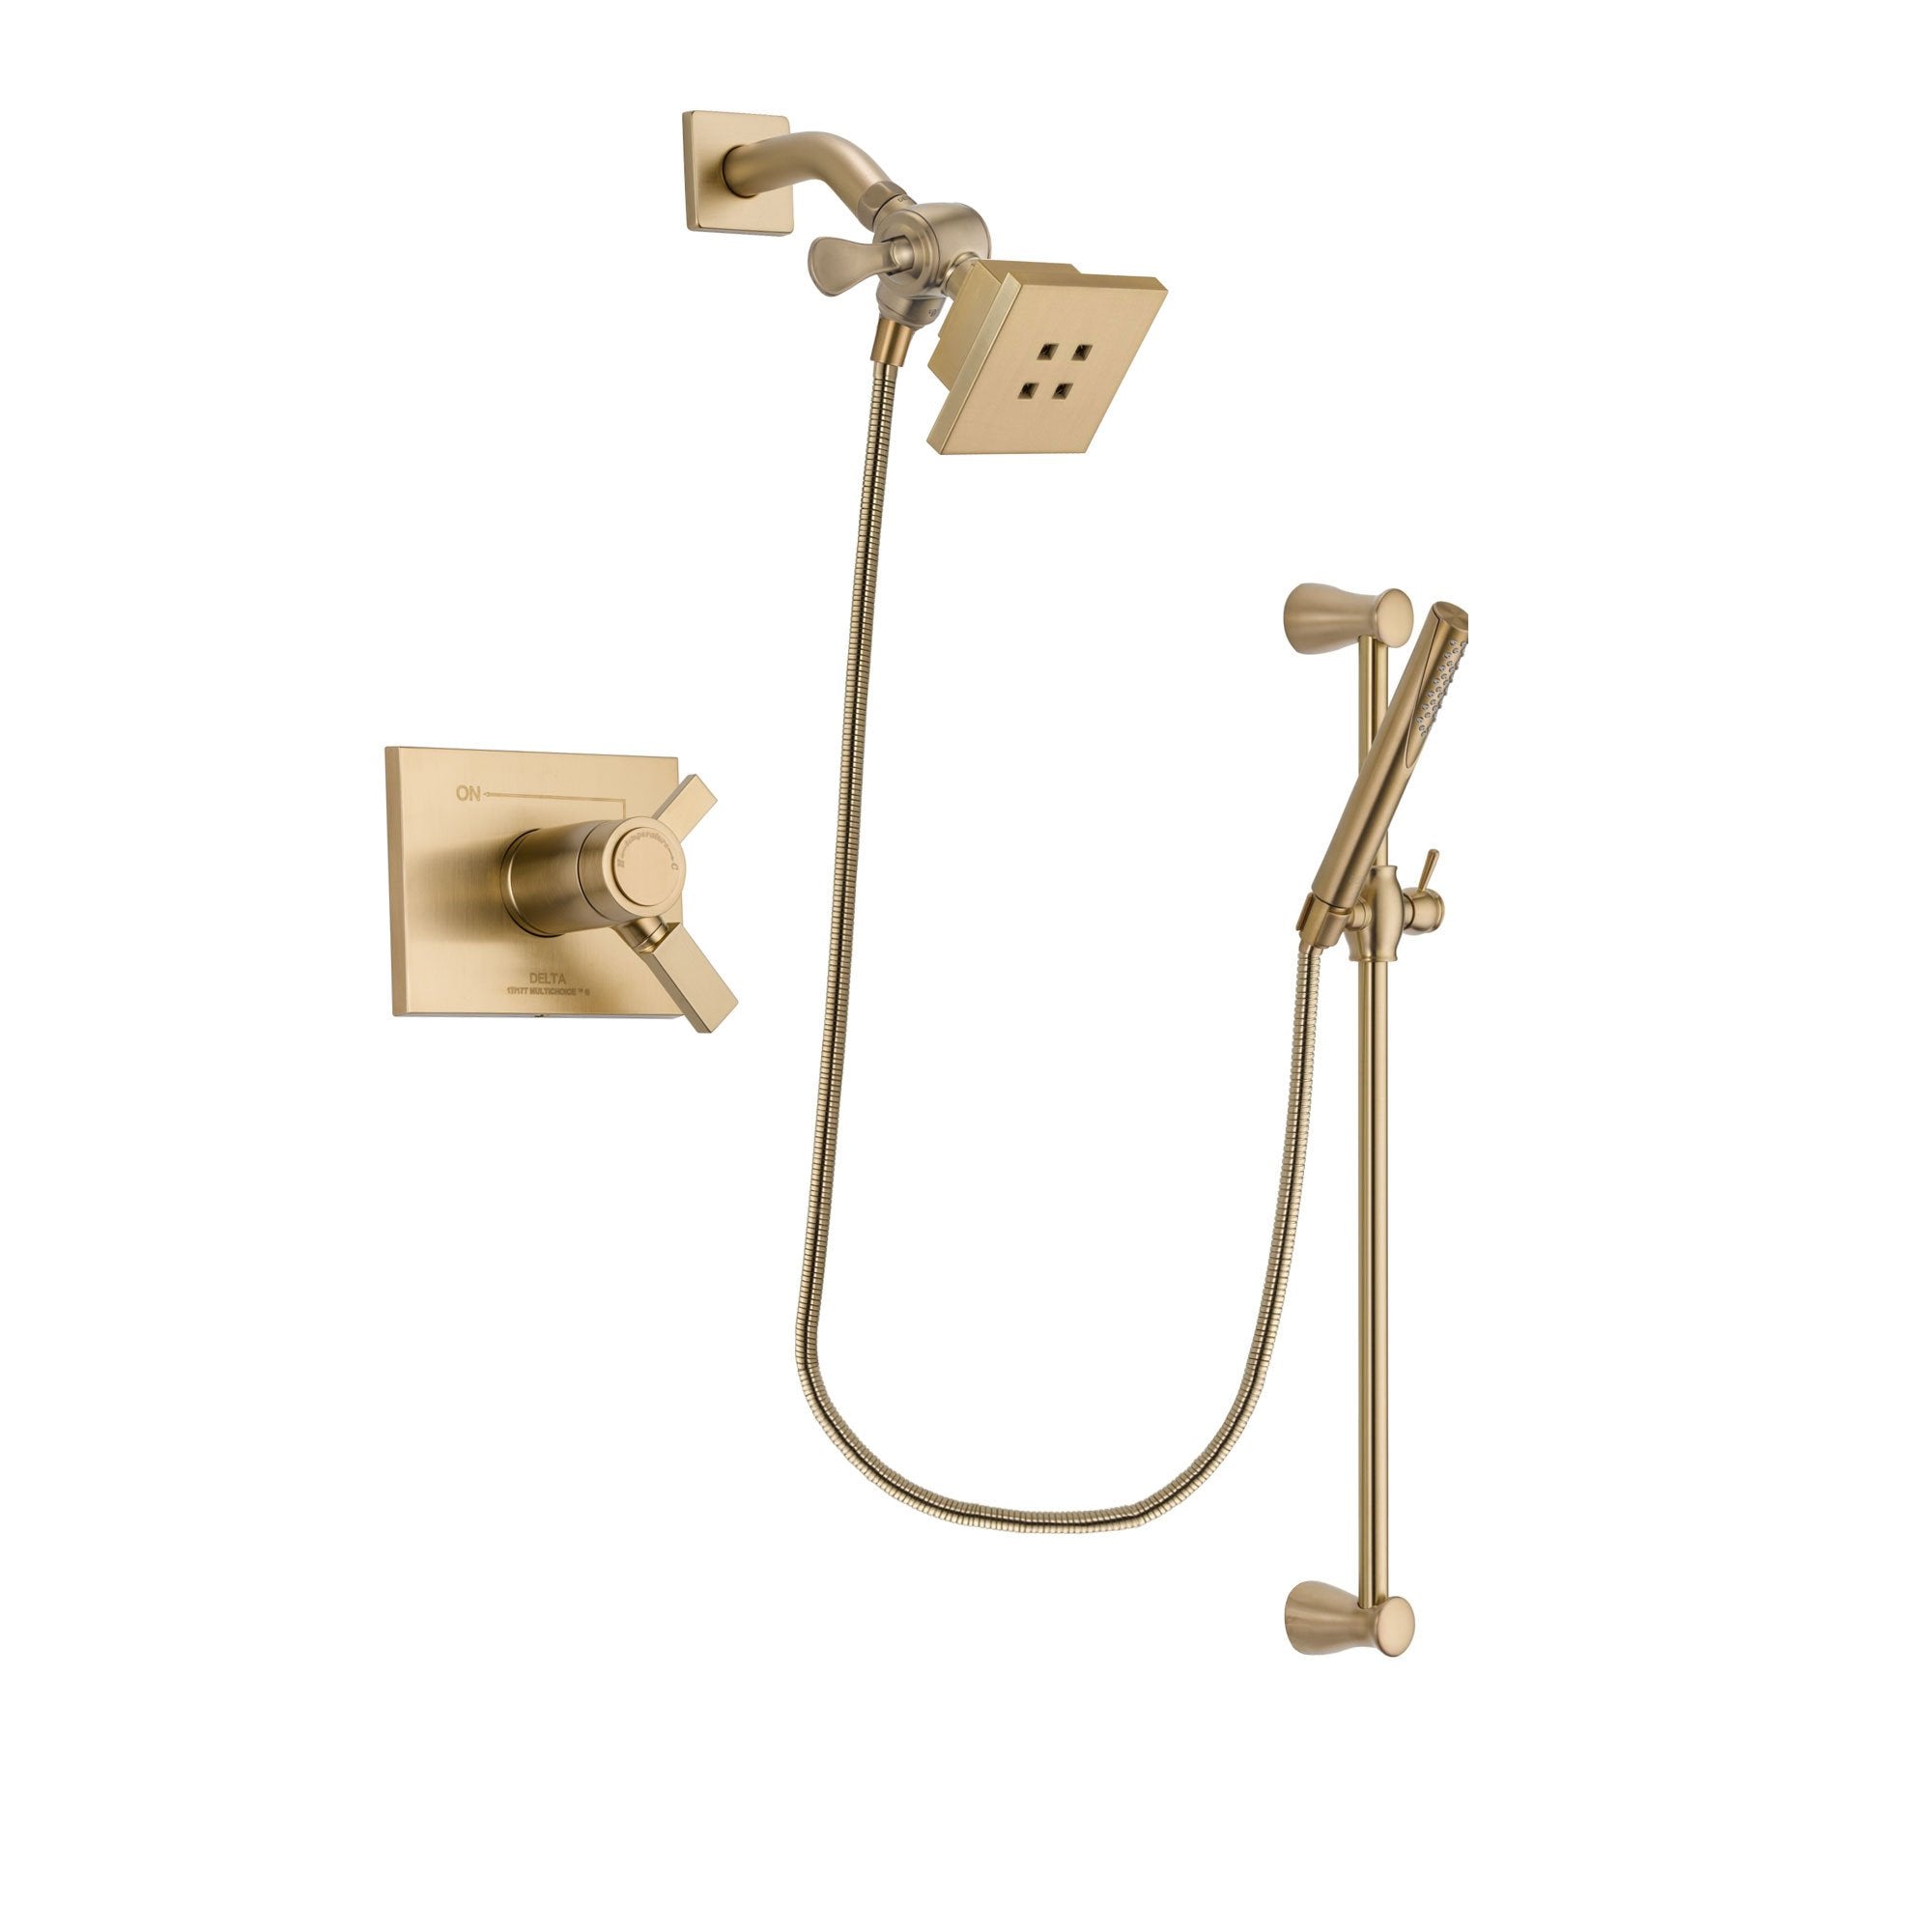 Delta Vero Champagne Bronze Finish Thermostatic Shower Faucet System Package with Square Showerhead and Modern Handheld Shower with Slide Bar Includes Rough-in Valve DSP3948V